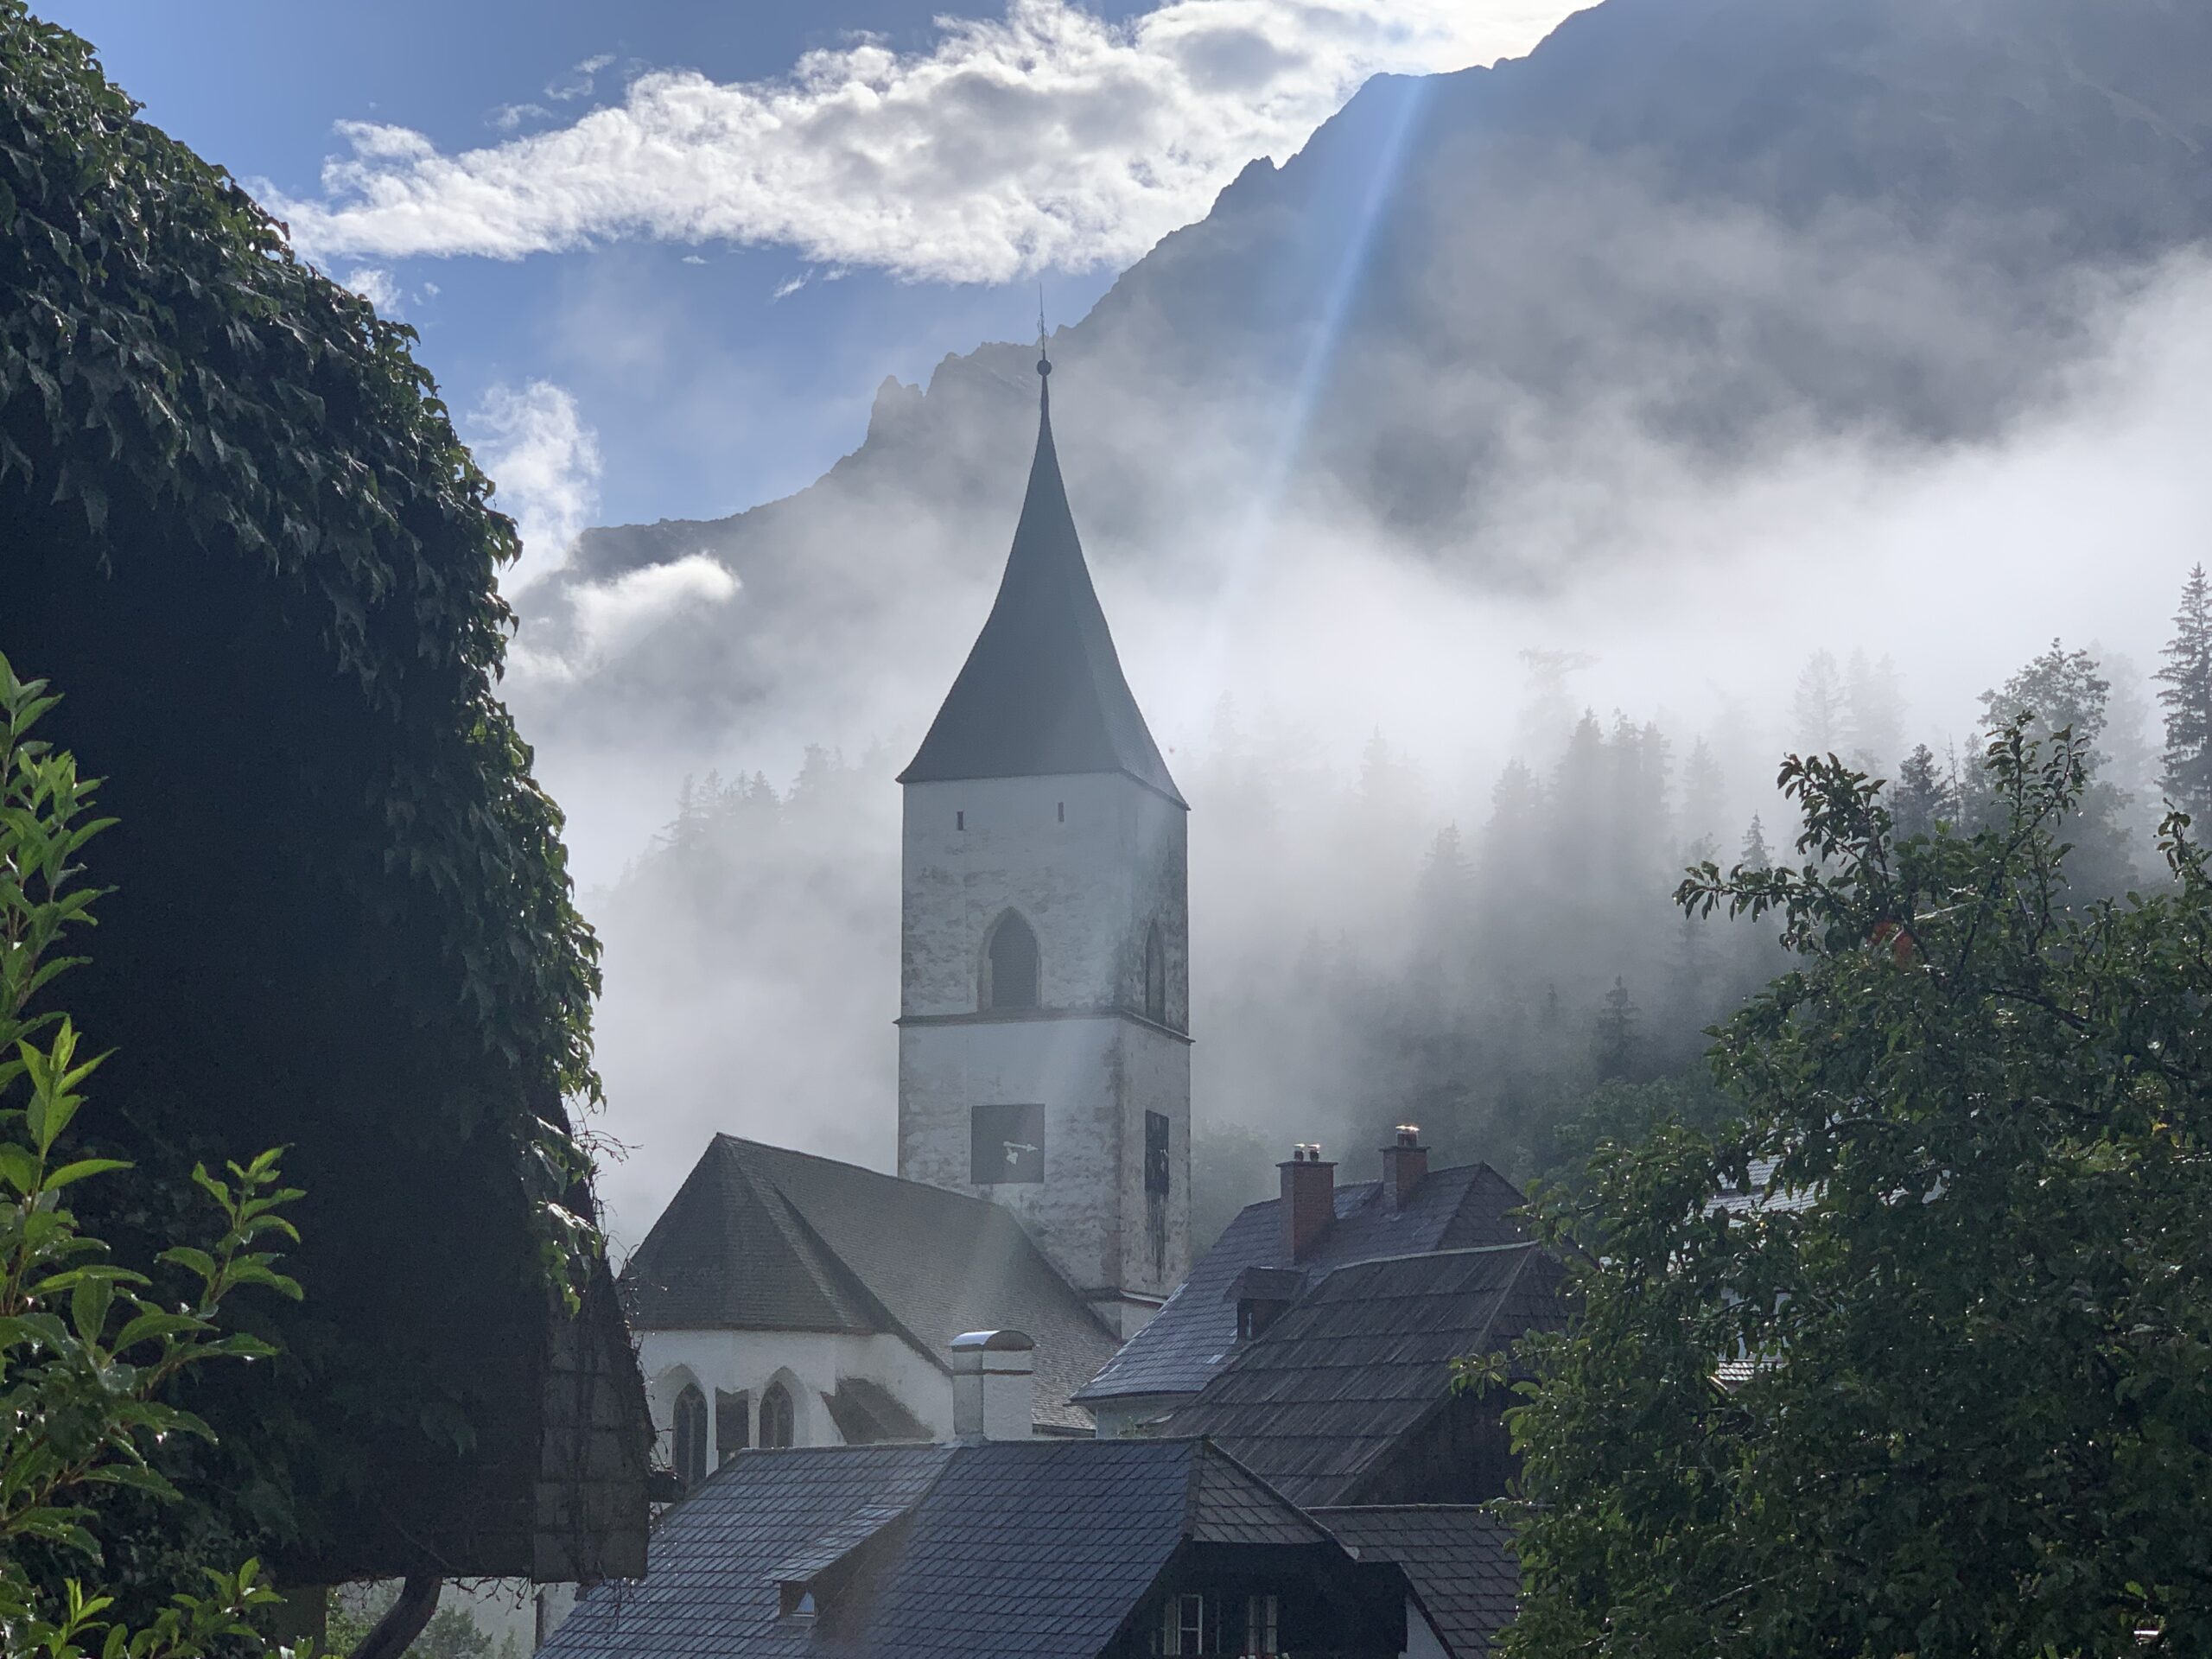 Beautiful self-made picture of the little church of Pürgg in Austria.